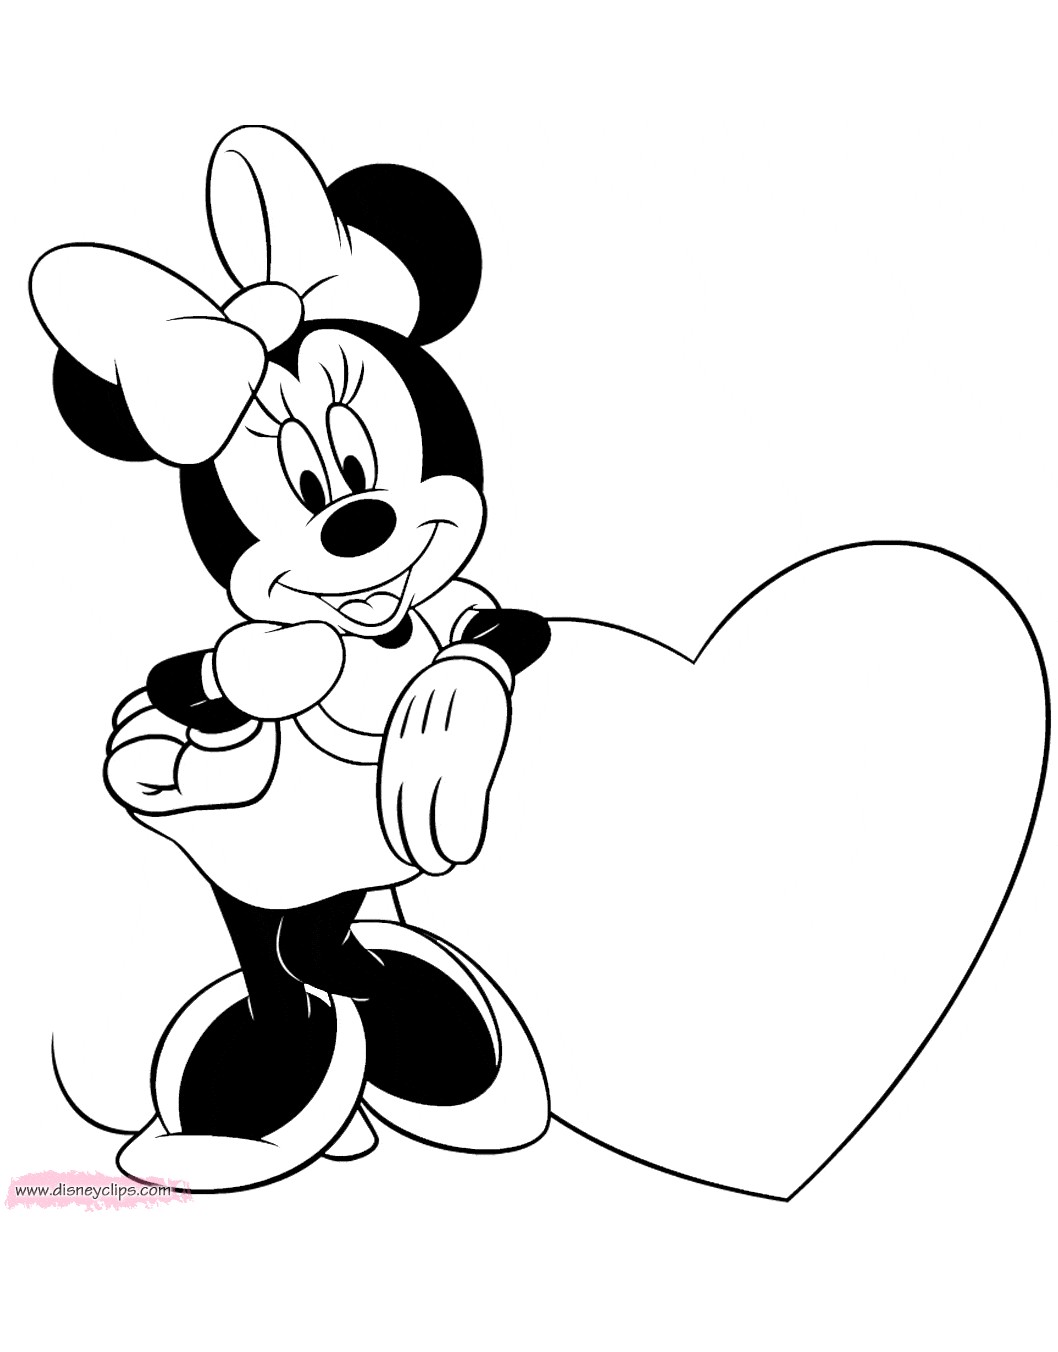 minnie-and-mickey-kissing-silhouette-at-getdrawings-free-download